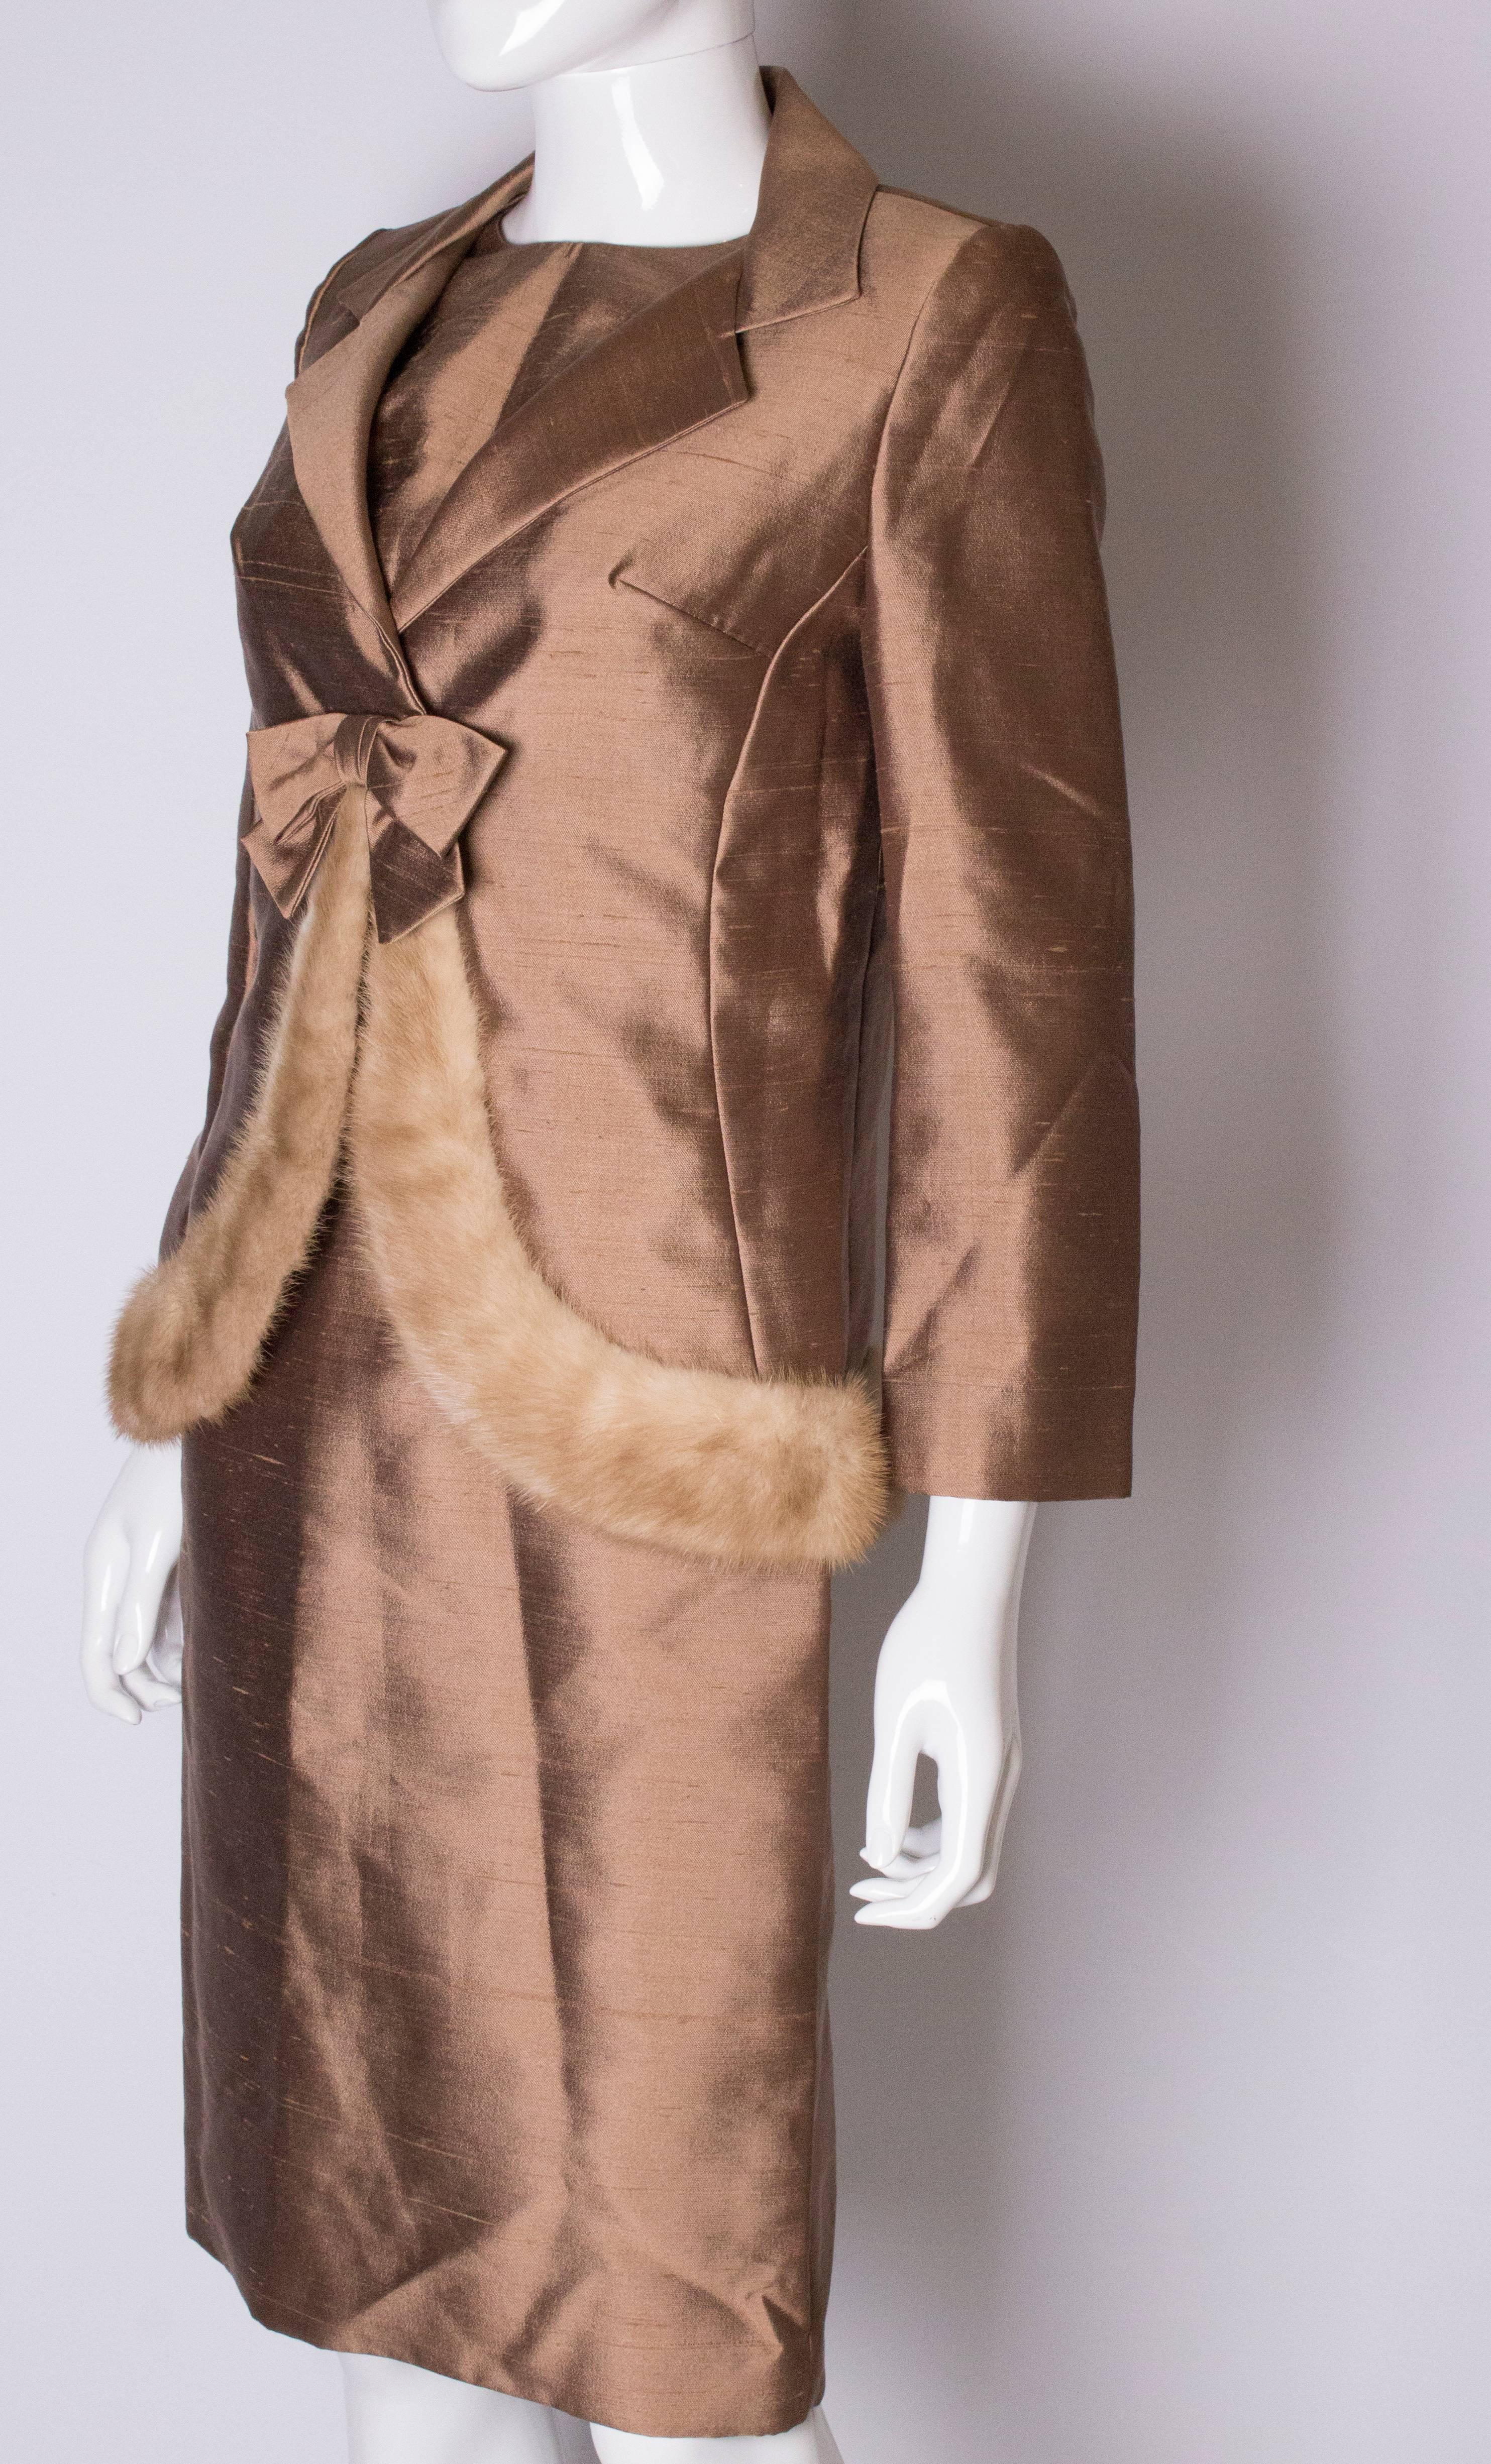 A chic vintage outfit by The Beverely Shop in Springfield , Massachusetts. The shift dress is tailored, sleeveless and fully lined. The jacket has a single fastening at the front and is trimmed with mink at the hem. It is fully lined.
Measurements: